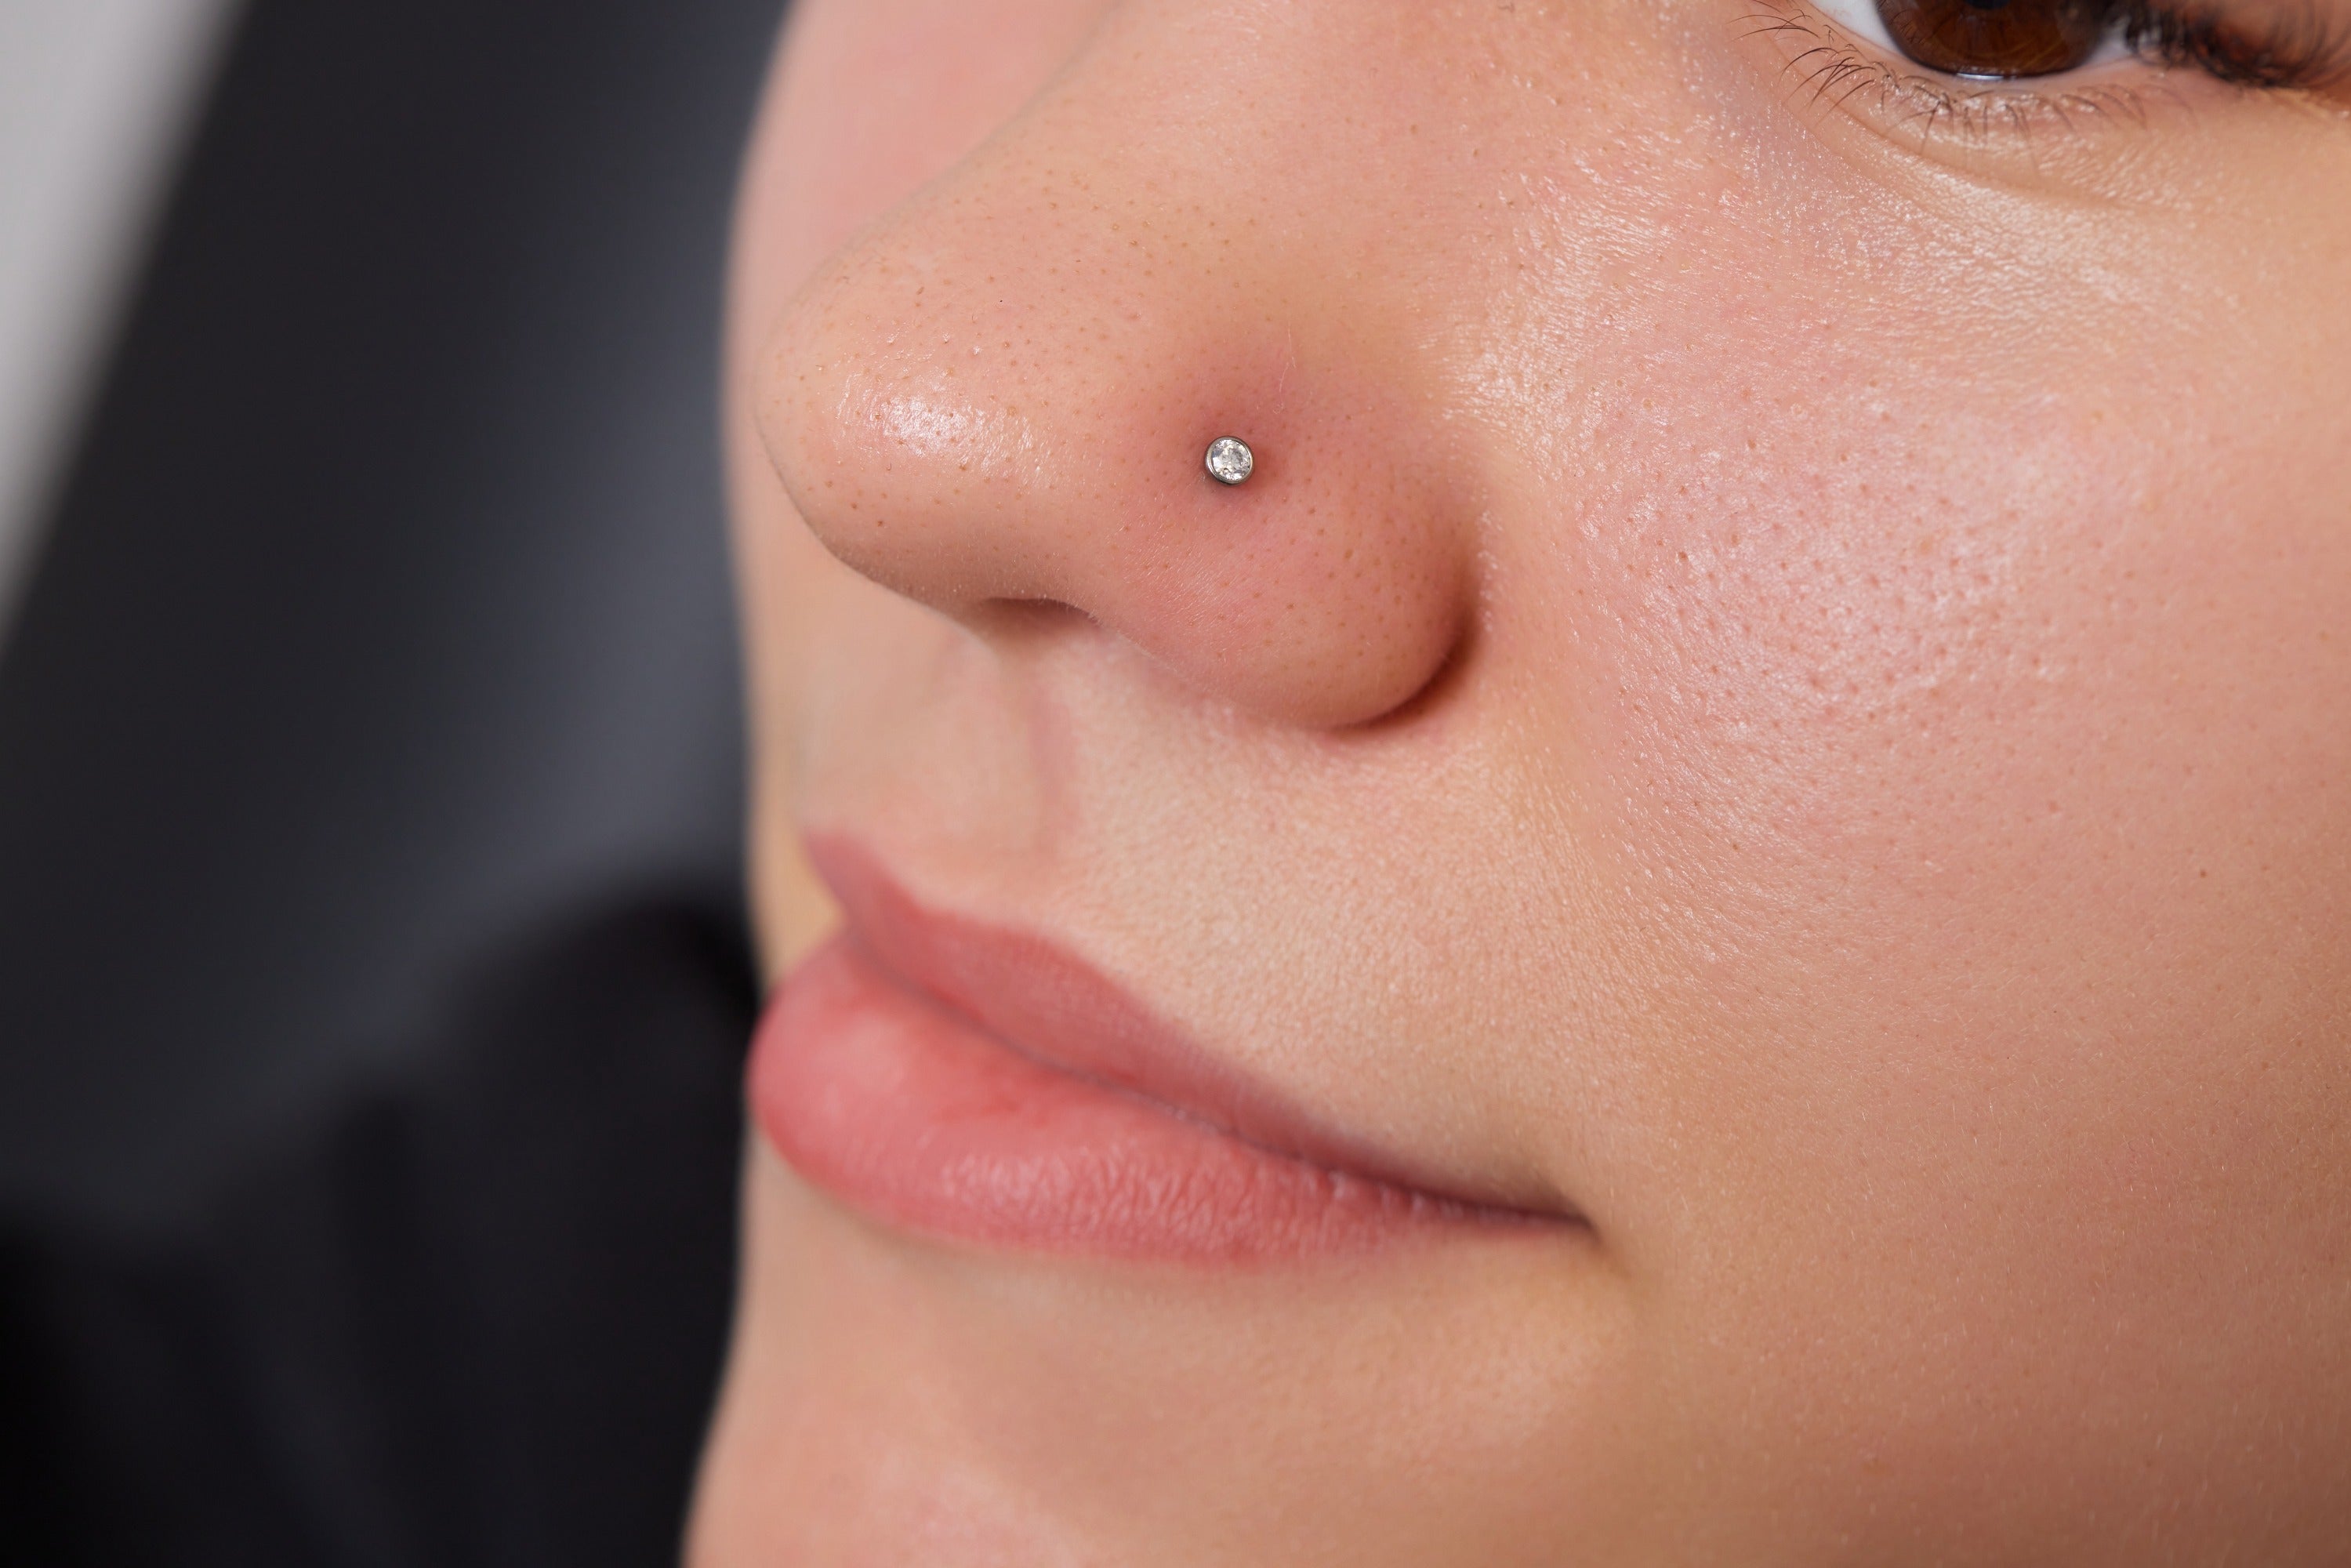 HPrevention of Infected Nose Piercing